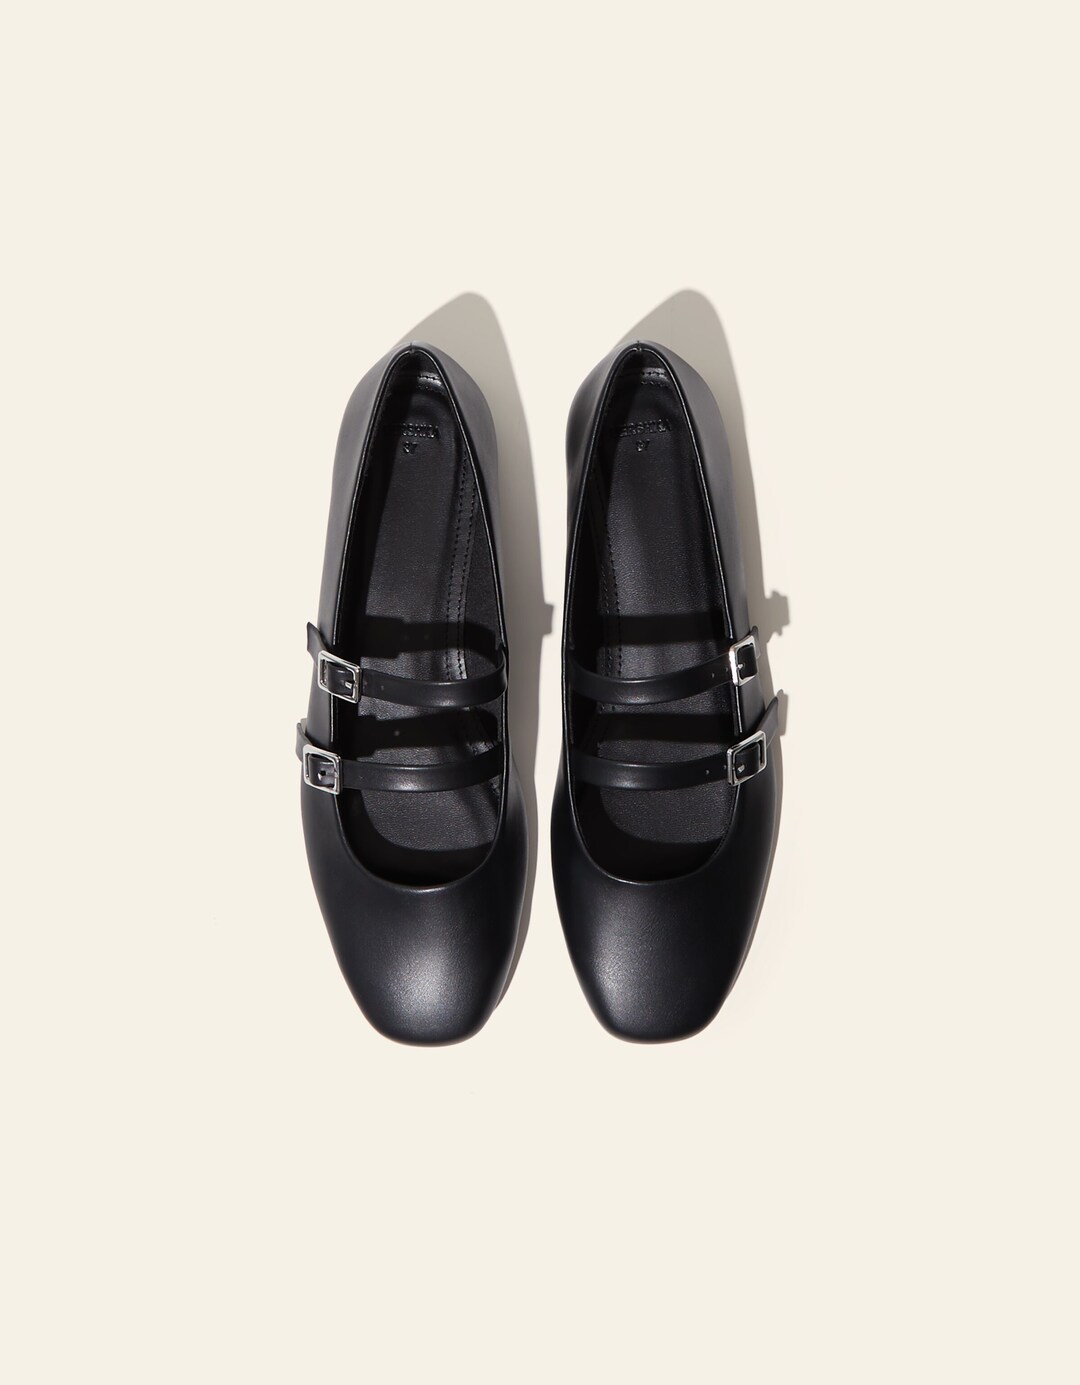 Ballet flats with buckles